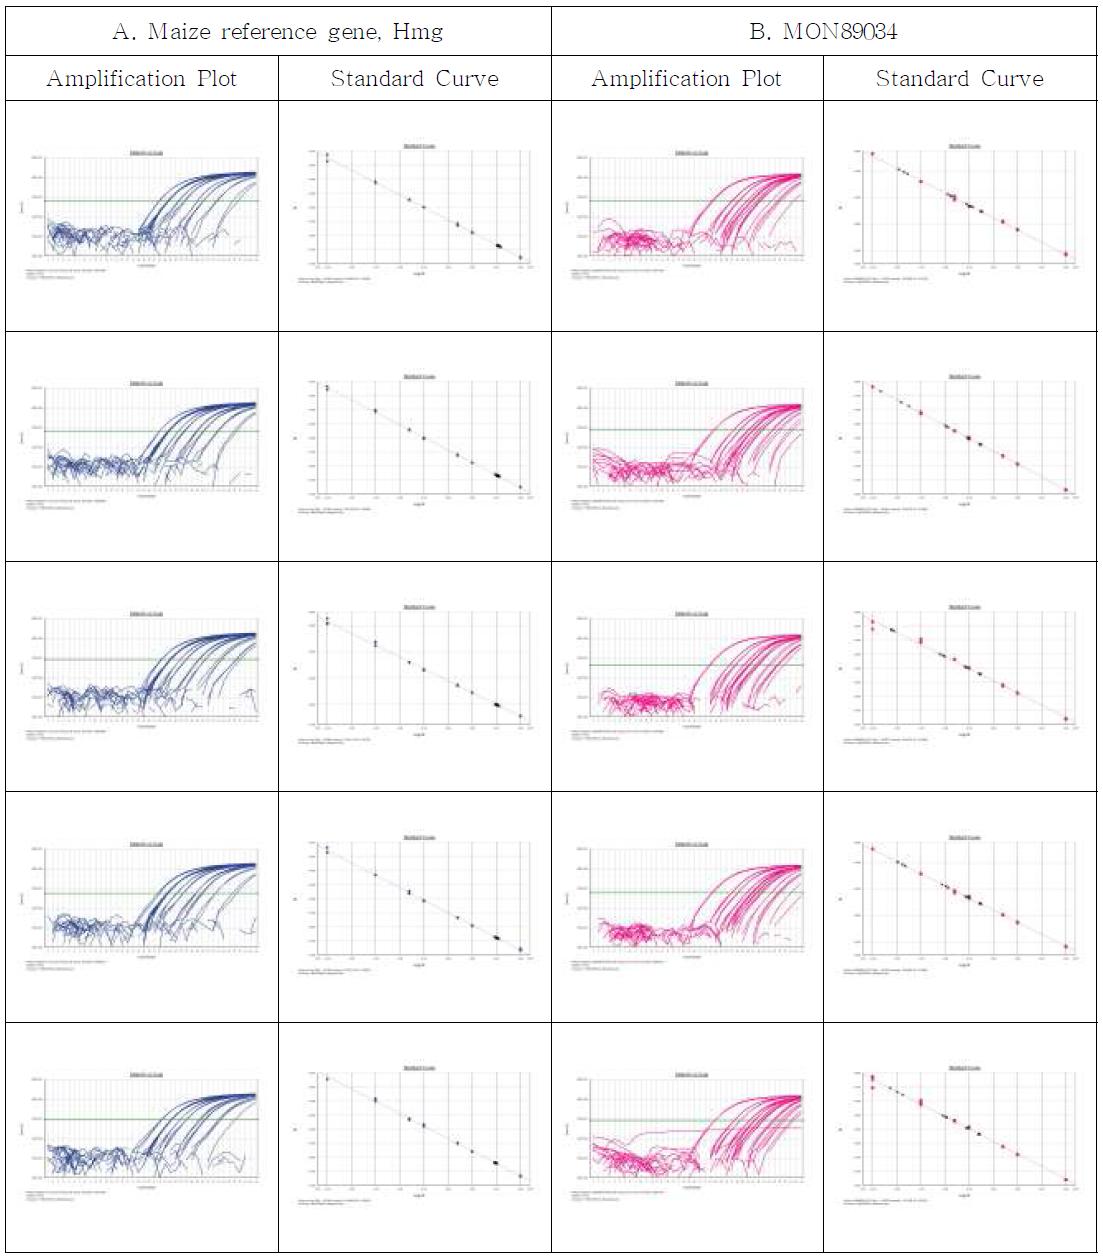 Amplification plots and standard curves for MON89034 event-specific quantitative Real-time PCR method using gradient-diluted MON89034 CRM genomic DNA as the template, performed by Lab. 1. A. Amplification graph and standard curves for the maize reference gene, Hmg assay. B. Amplification graph and standard curves for the MON89034-event specific assay.